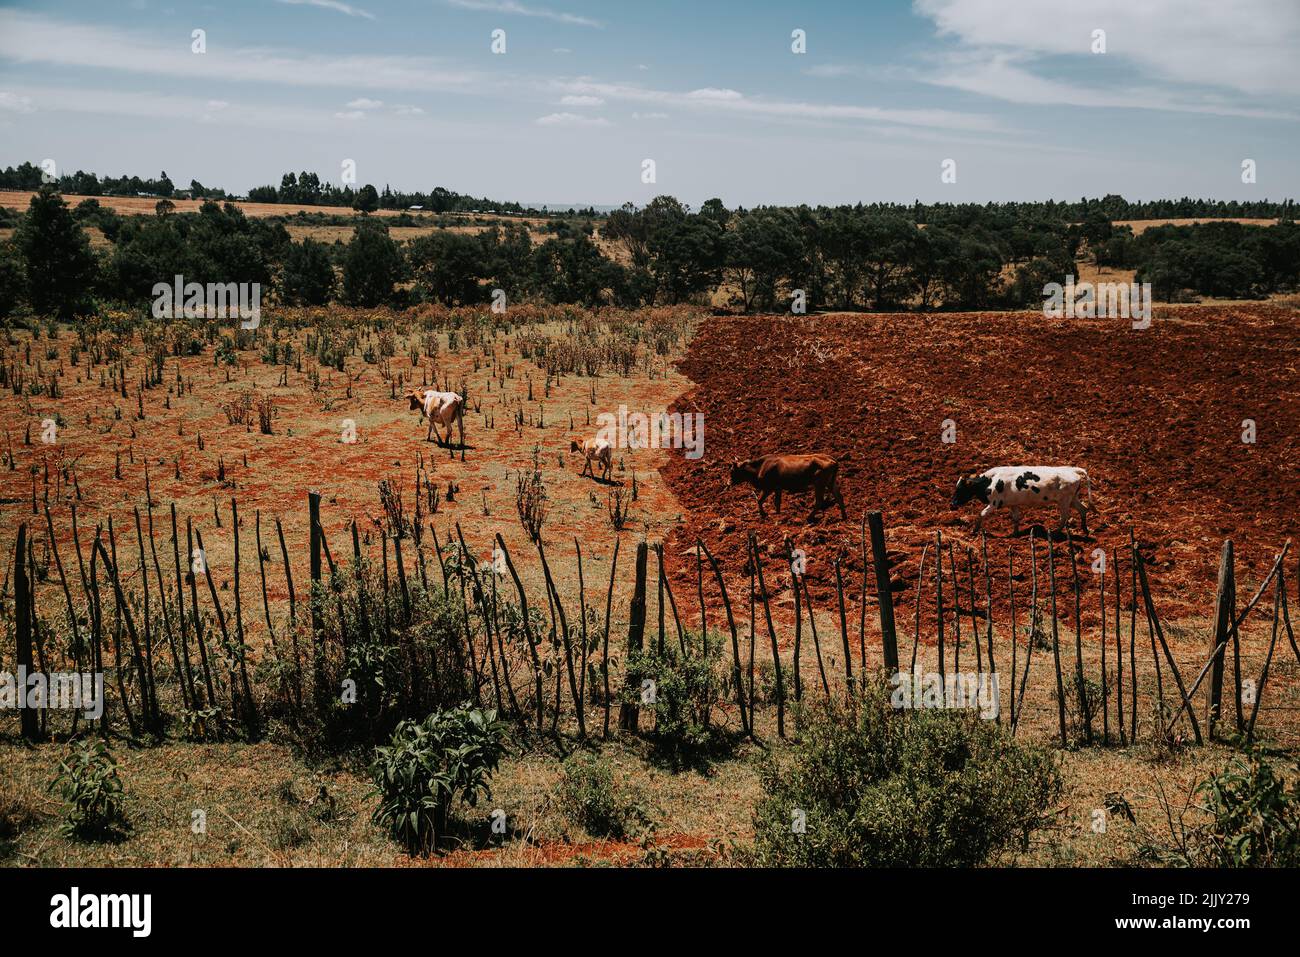 Cows on the farm in Africa. Simple rural life in Kenya. Animals walking on the red soil Stock Photo